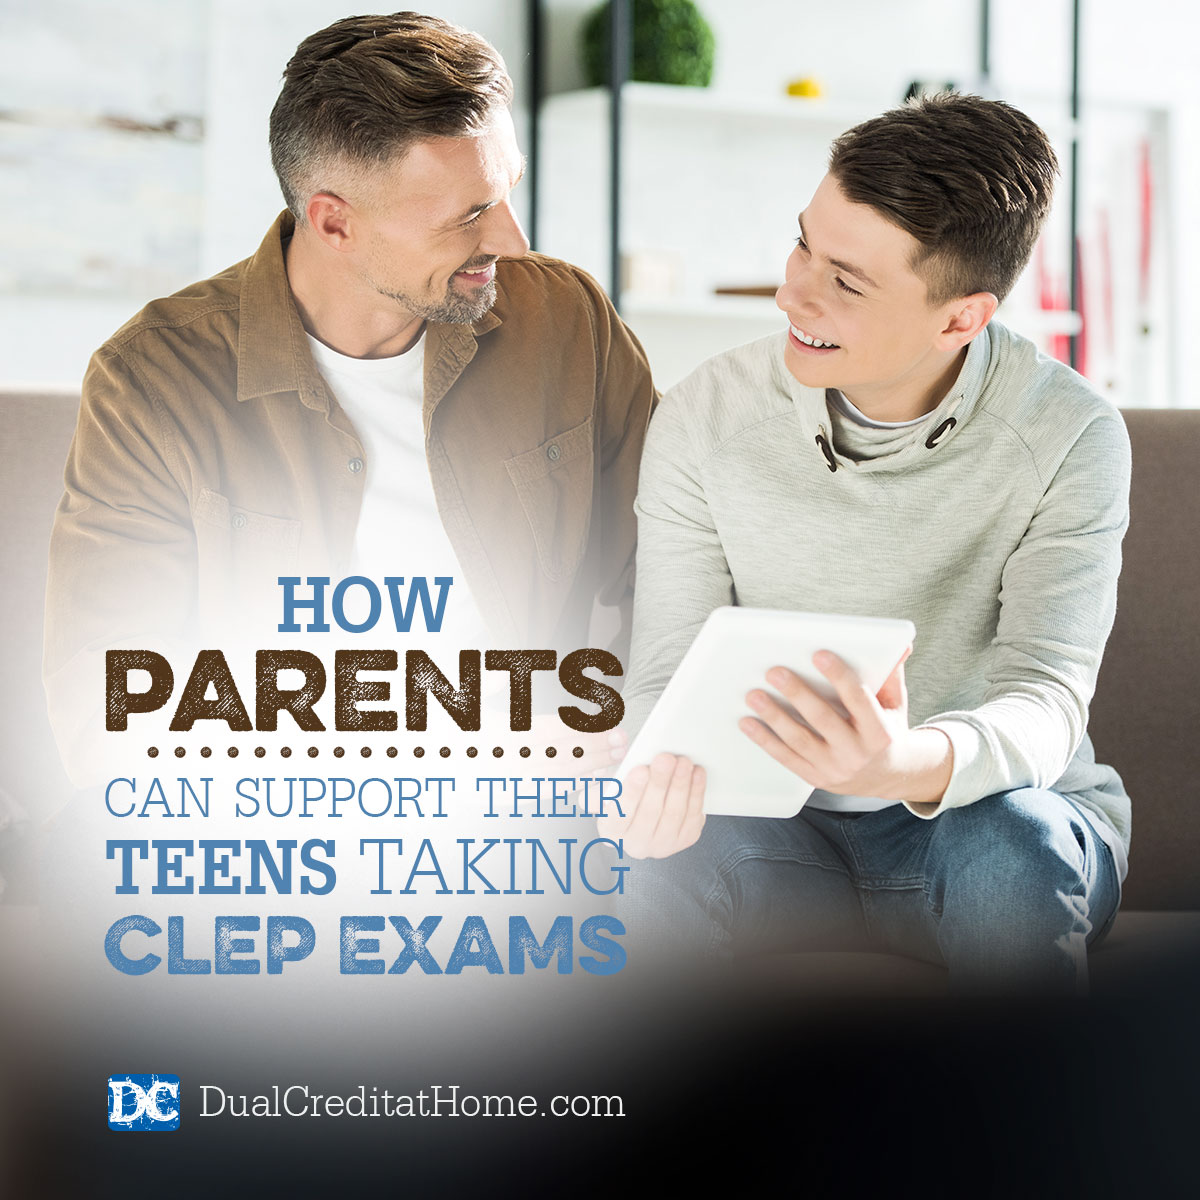 How Parents Can Support Their Teens Taking CLEP Exams